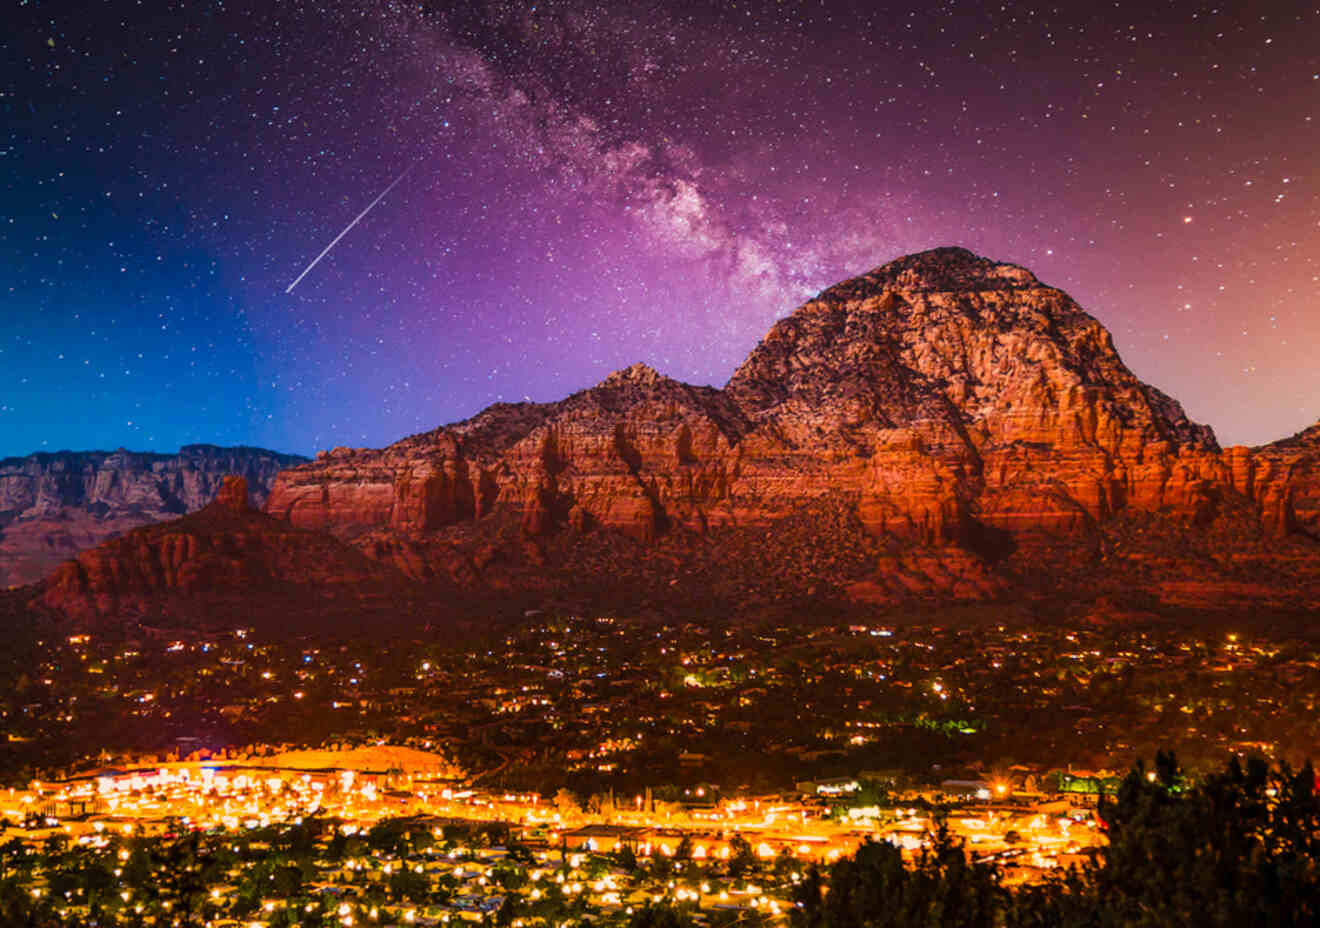 Aerial view of Sedona and the rocks at nigh with the Milky Way in the sky